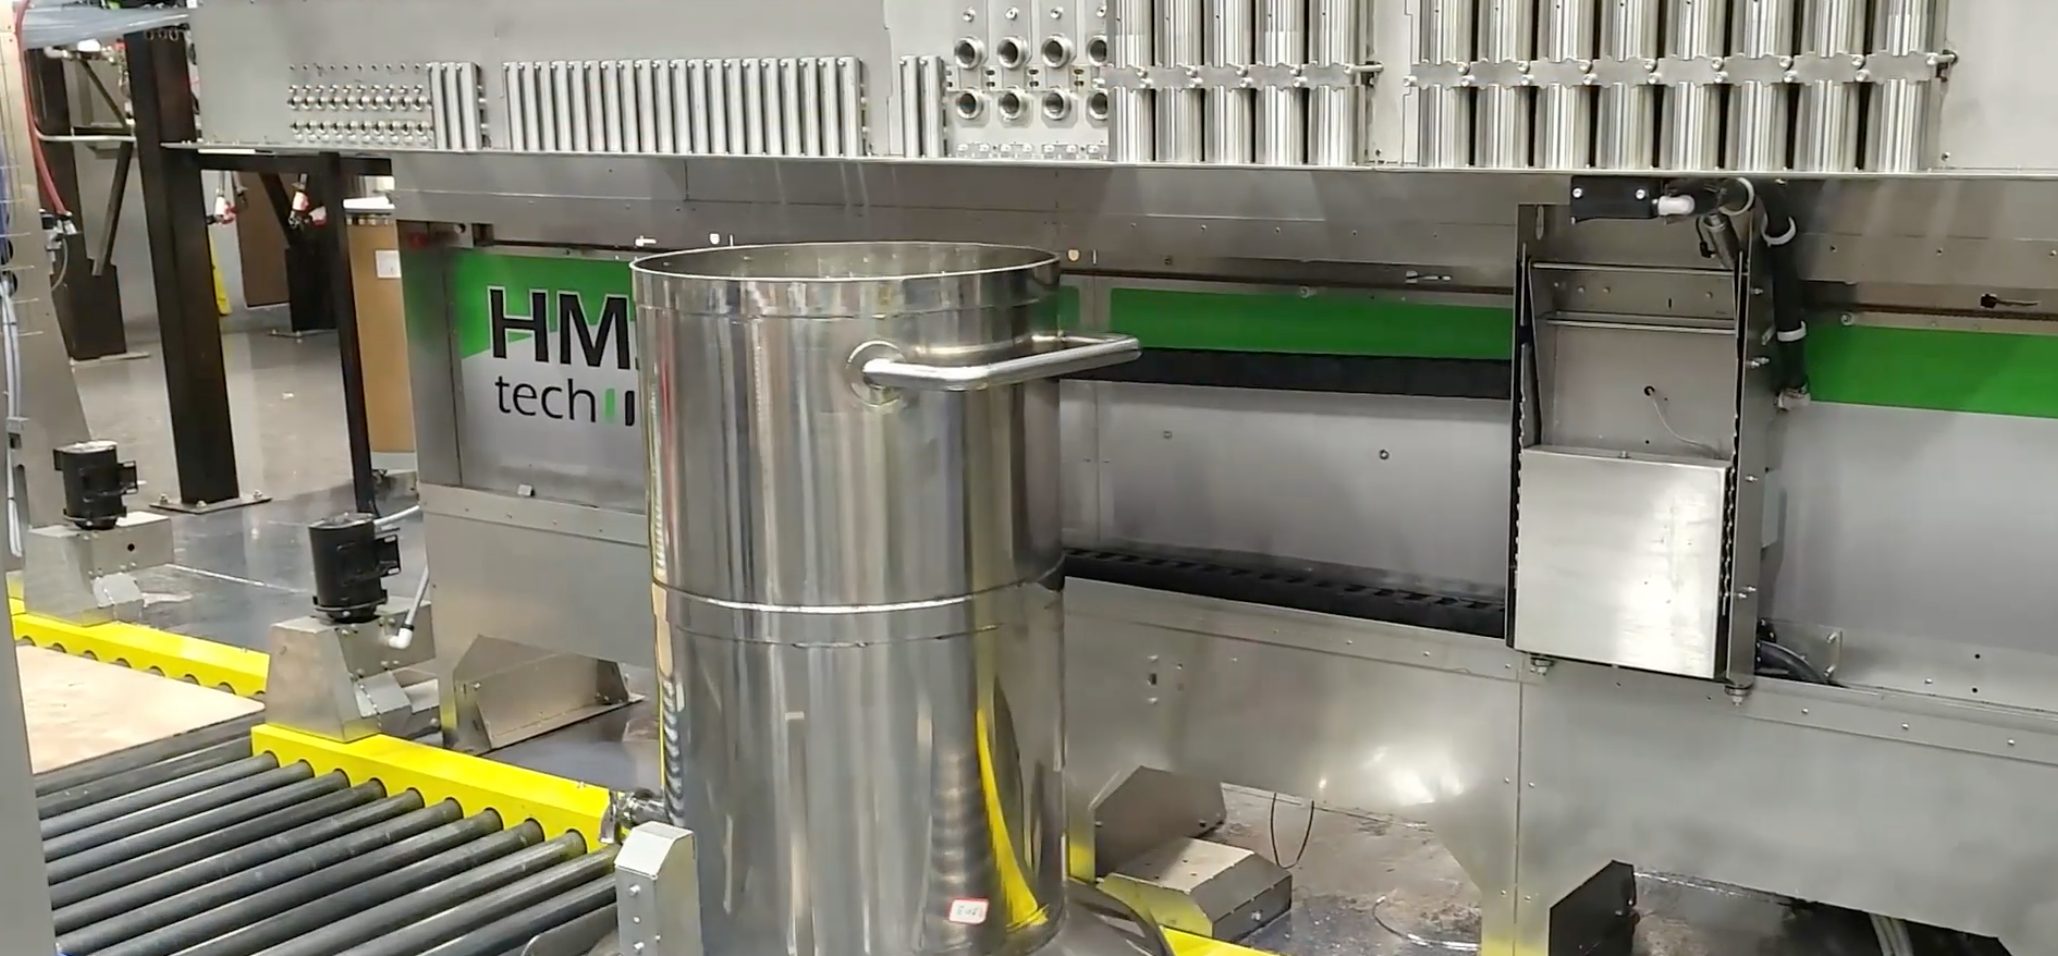 Dispensing yellow ink into metal bucket with HMJ tech A750 Factory Dispensing